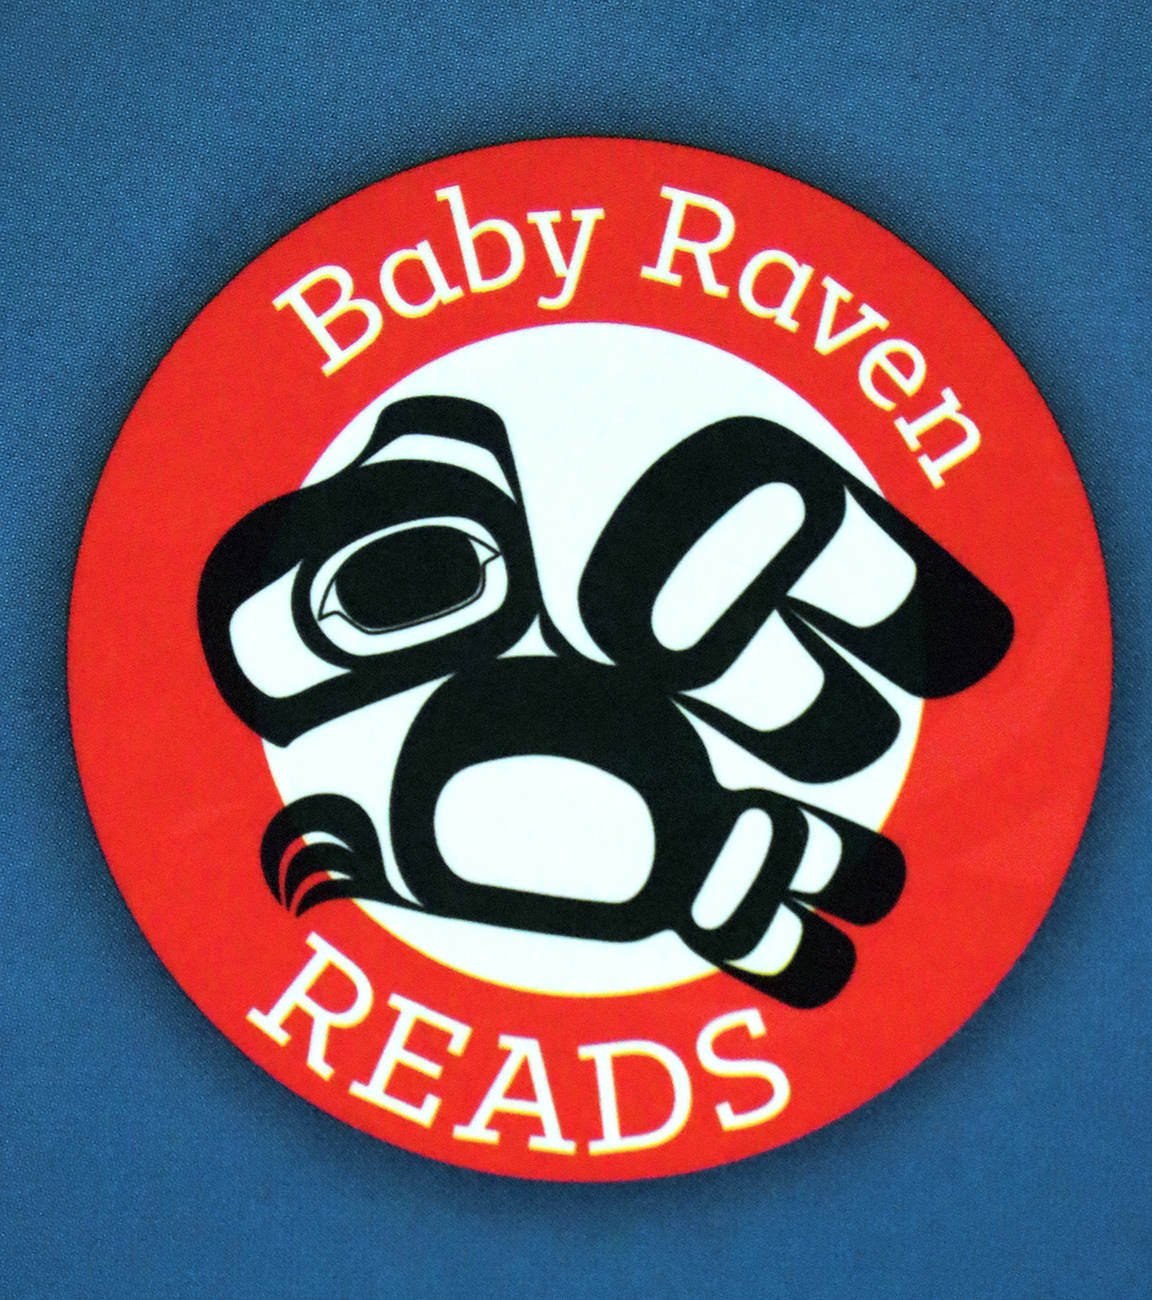 The Baby Raven Reads program is a Sealaska Heritage Institute program dedicated to providing reading resources in Alaska Native languages for young readers.
Ben Hohenstatt / 
Juneau Empire